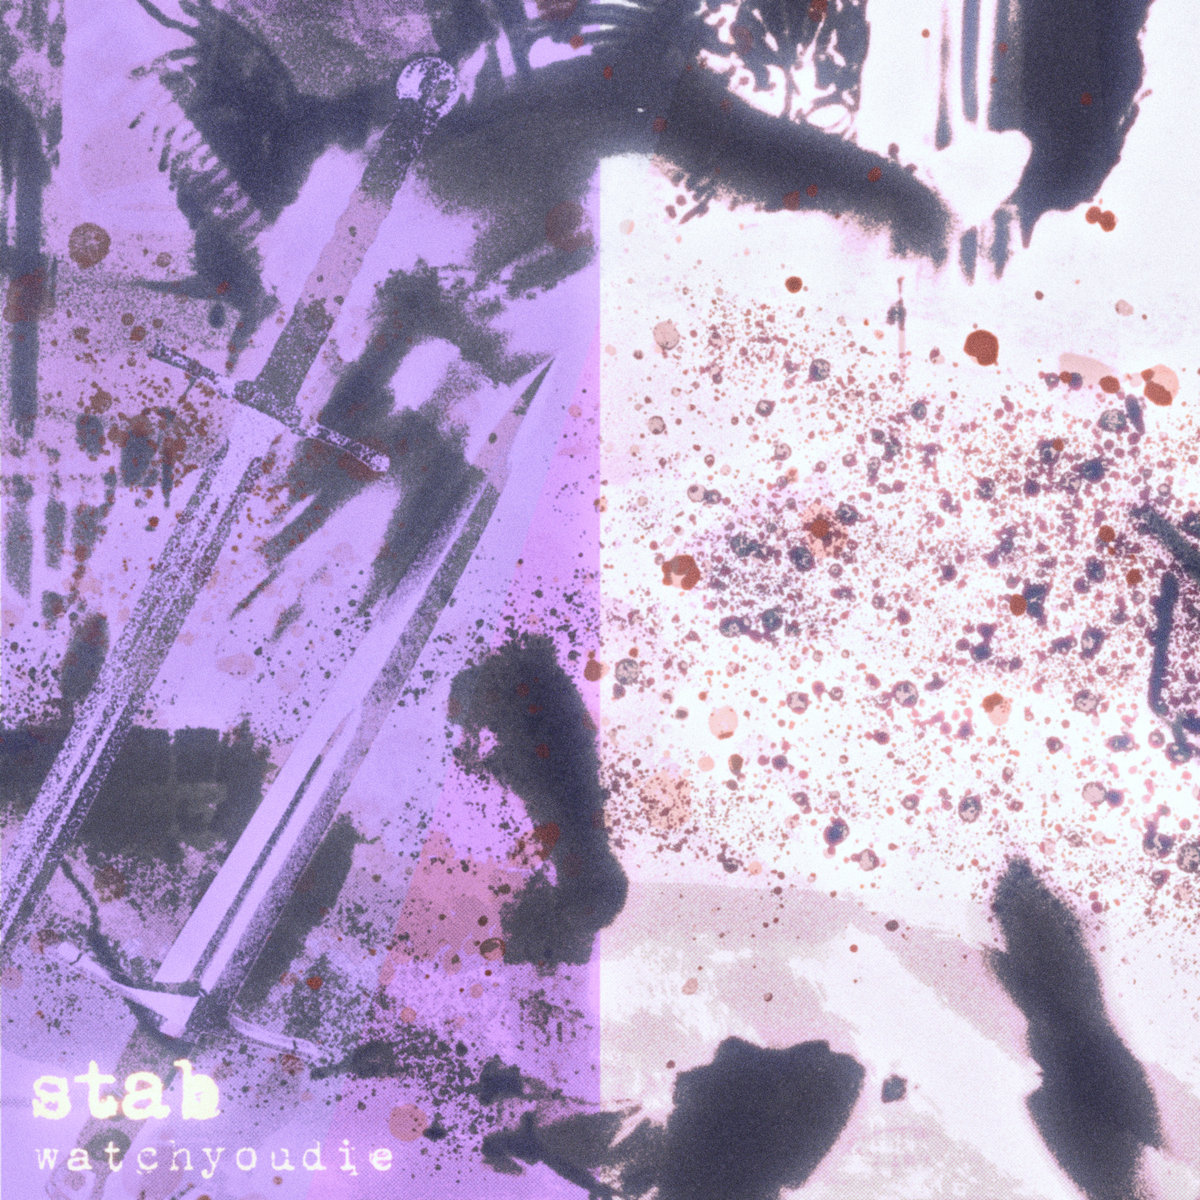 TRACK REVIEW: stab. – watch you die